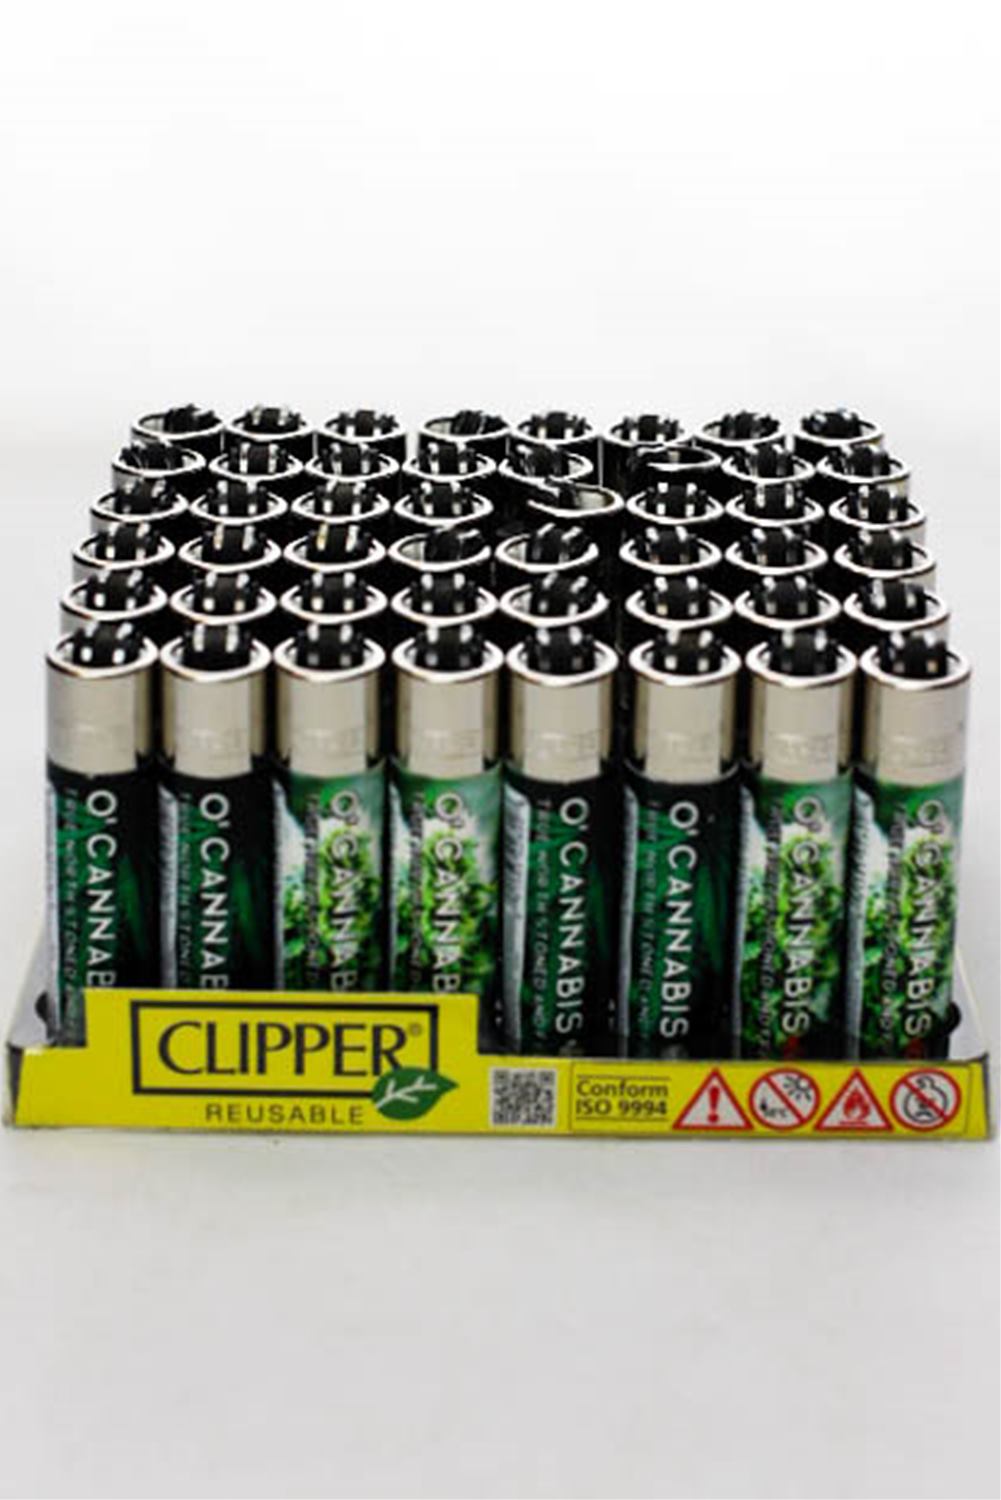 Clipper Refillable Lighters_1